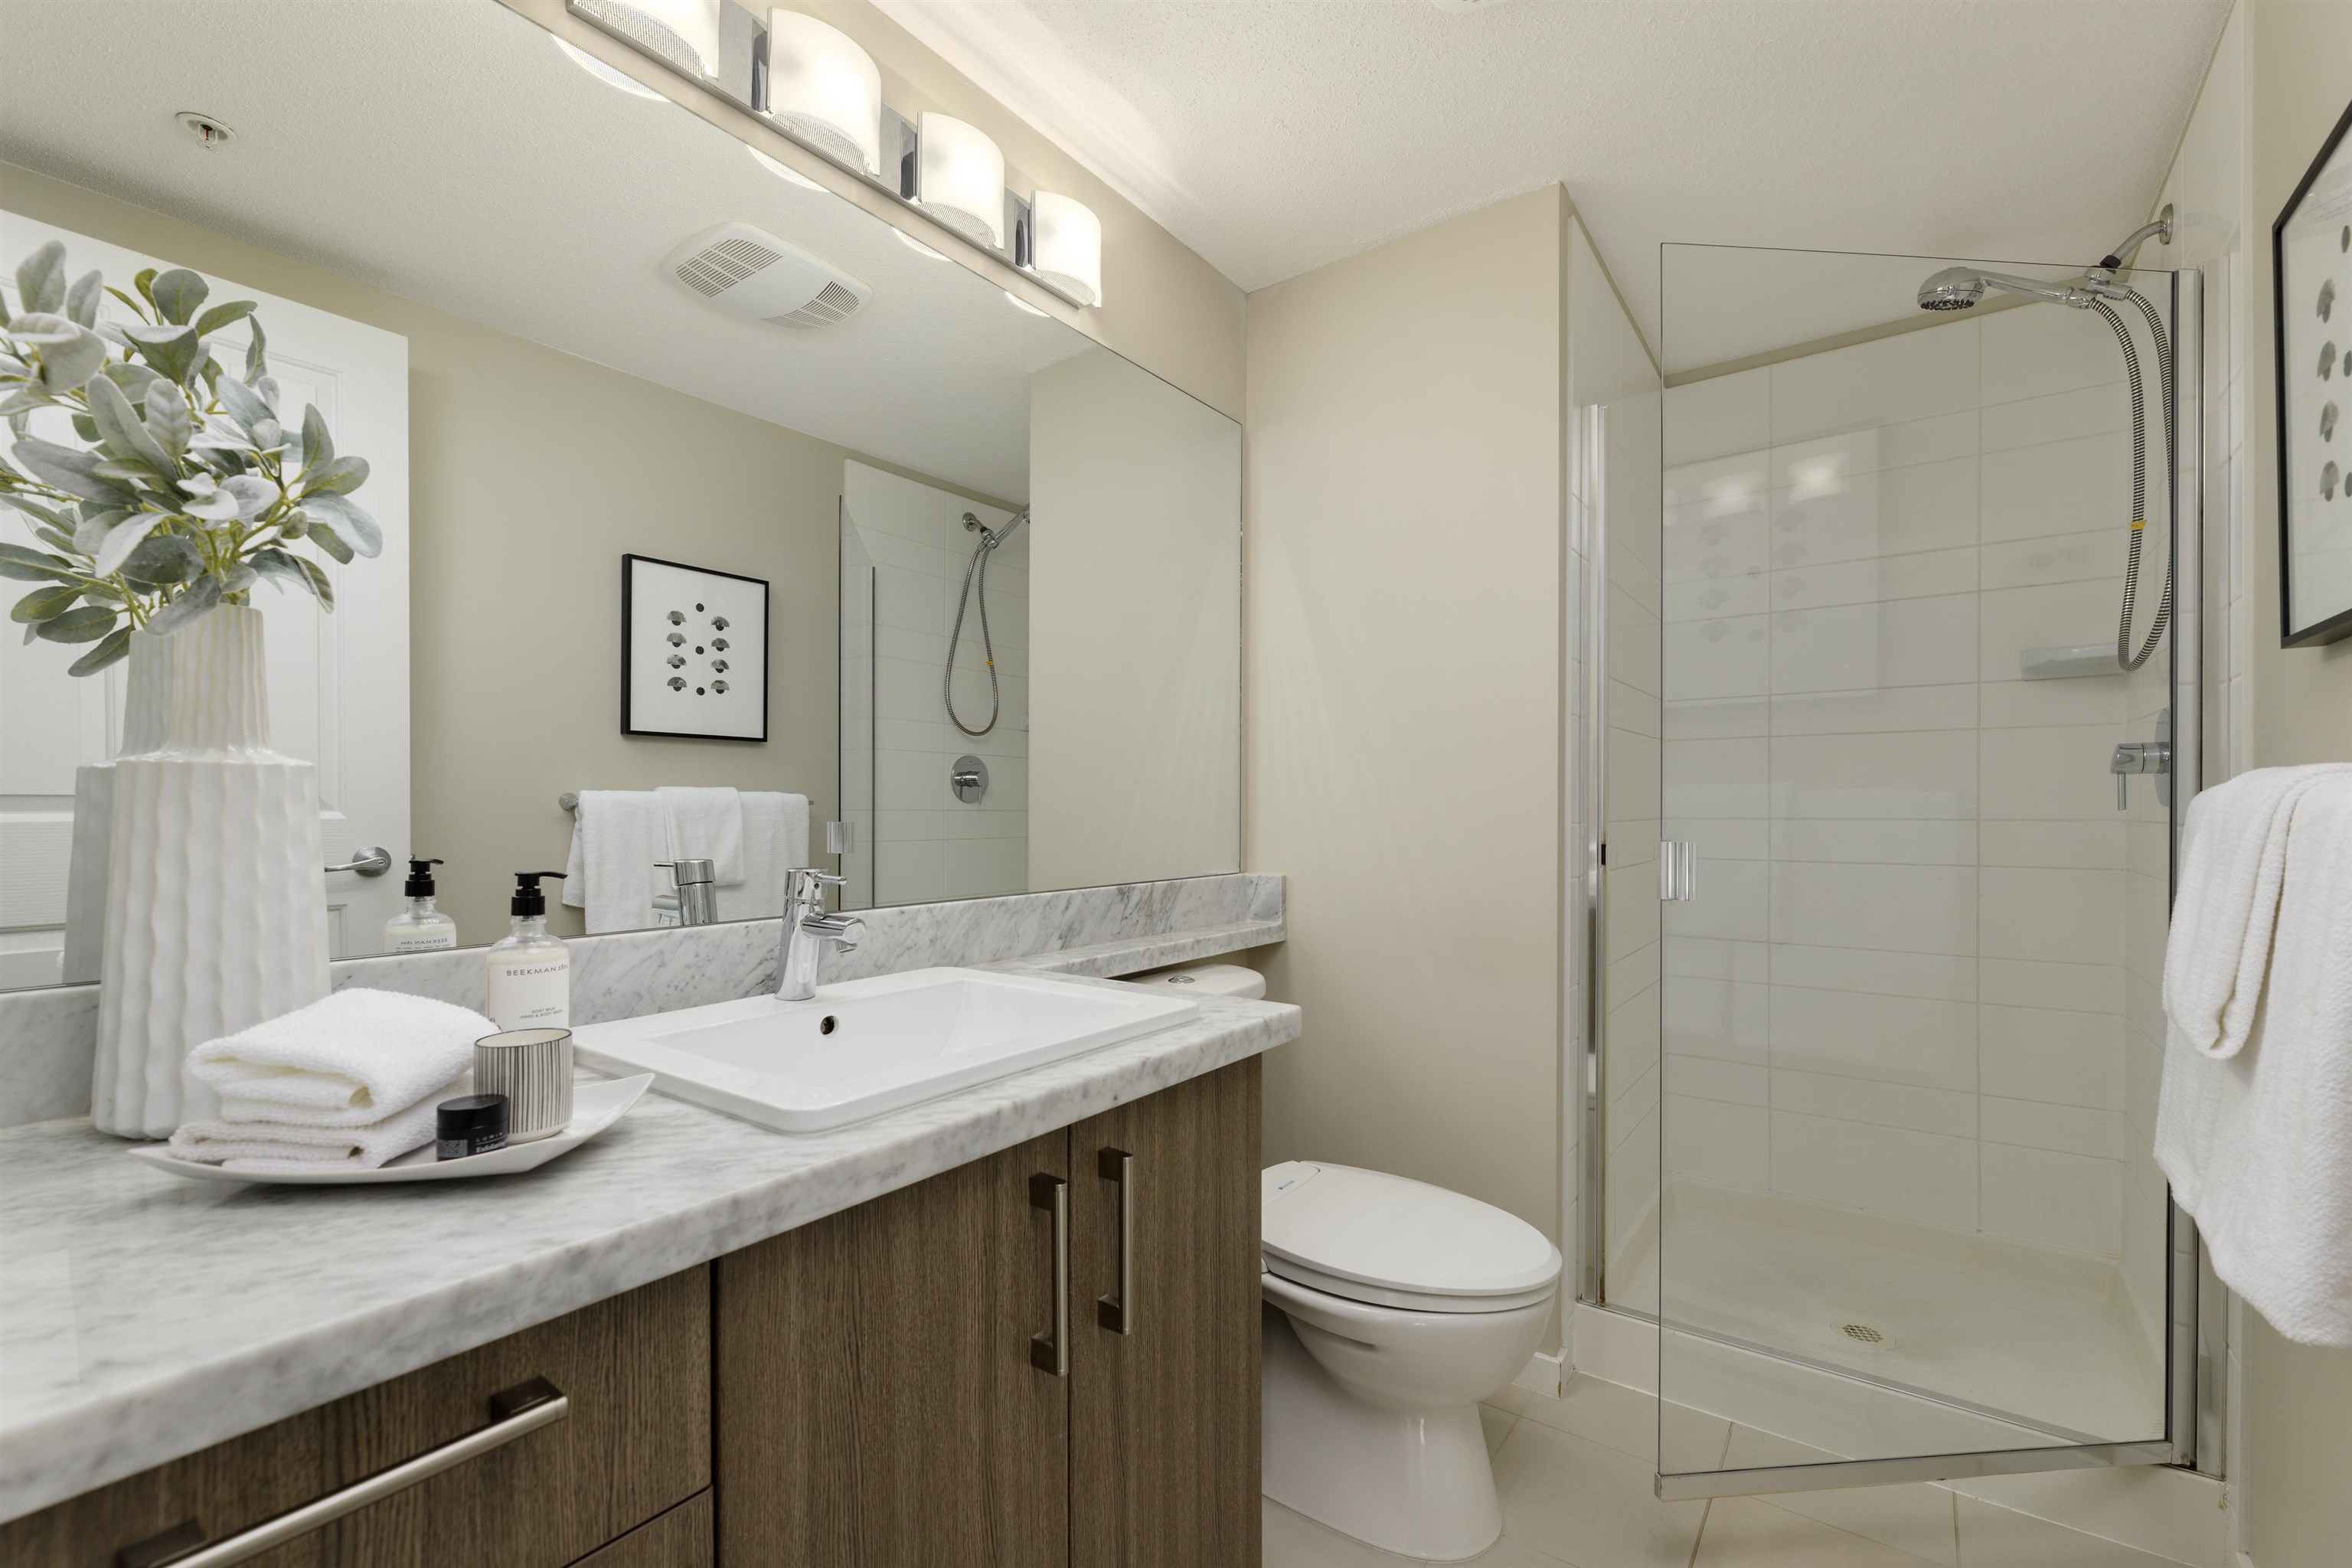 Secondary bathroom has plenty of counter space and storage.